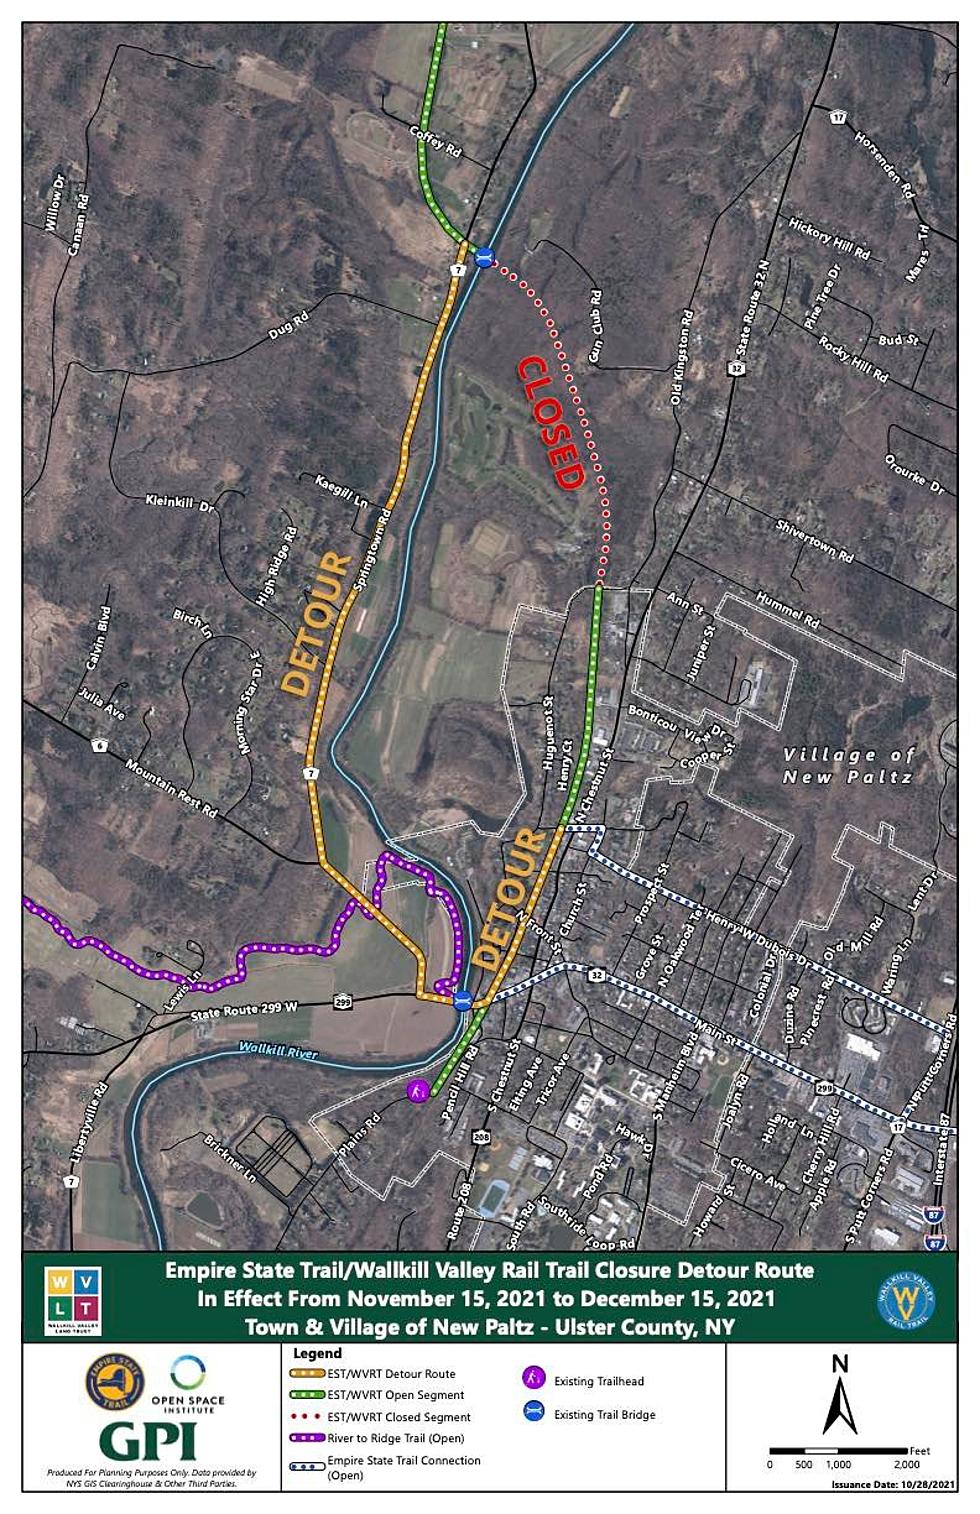 Popular Part of WVRT in New Paltz Will Be Closed